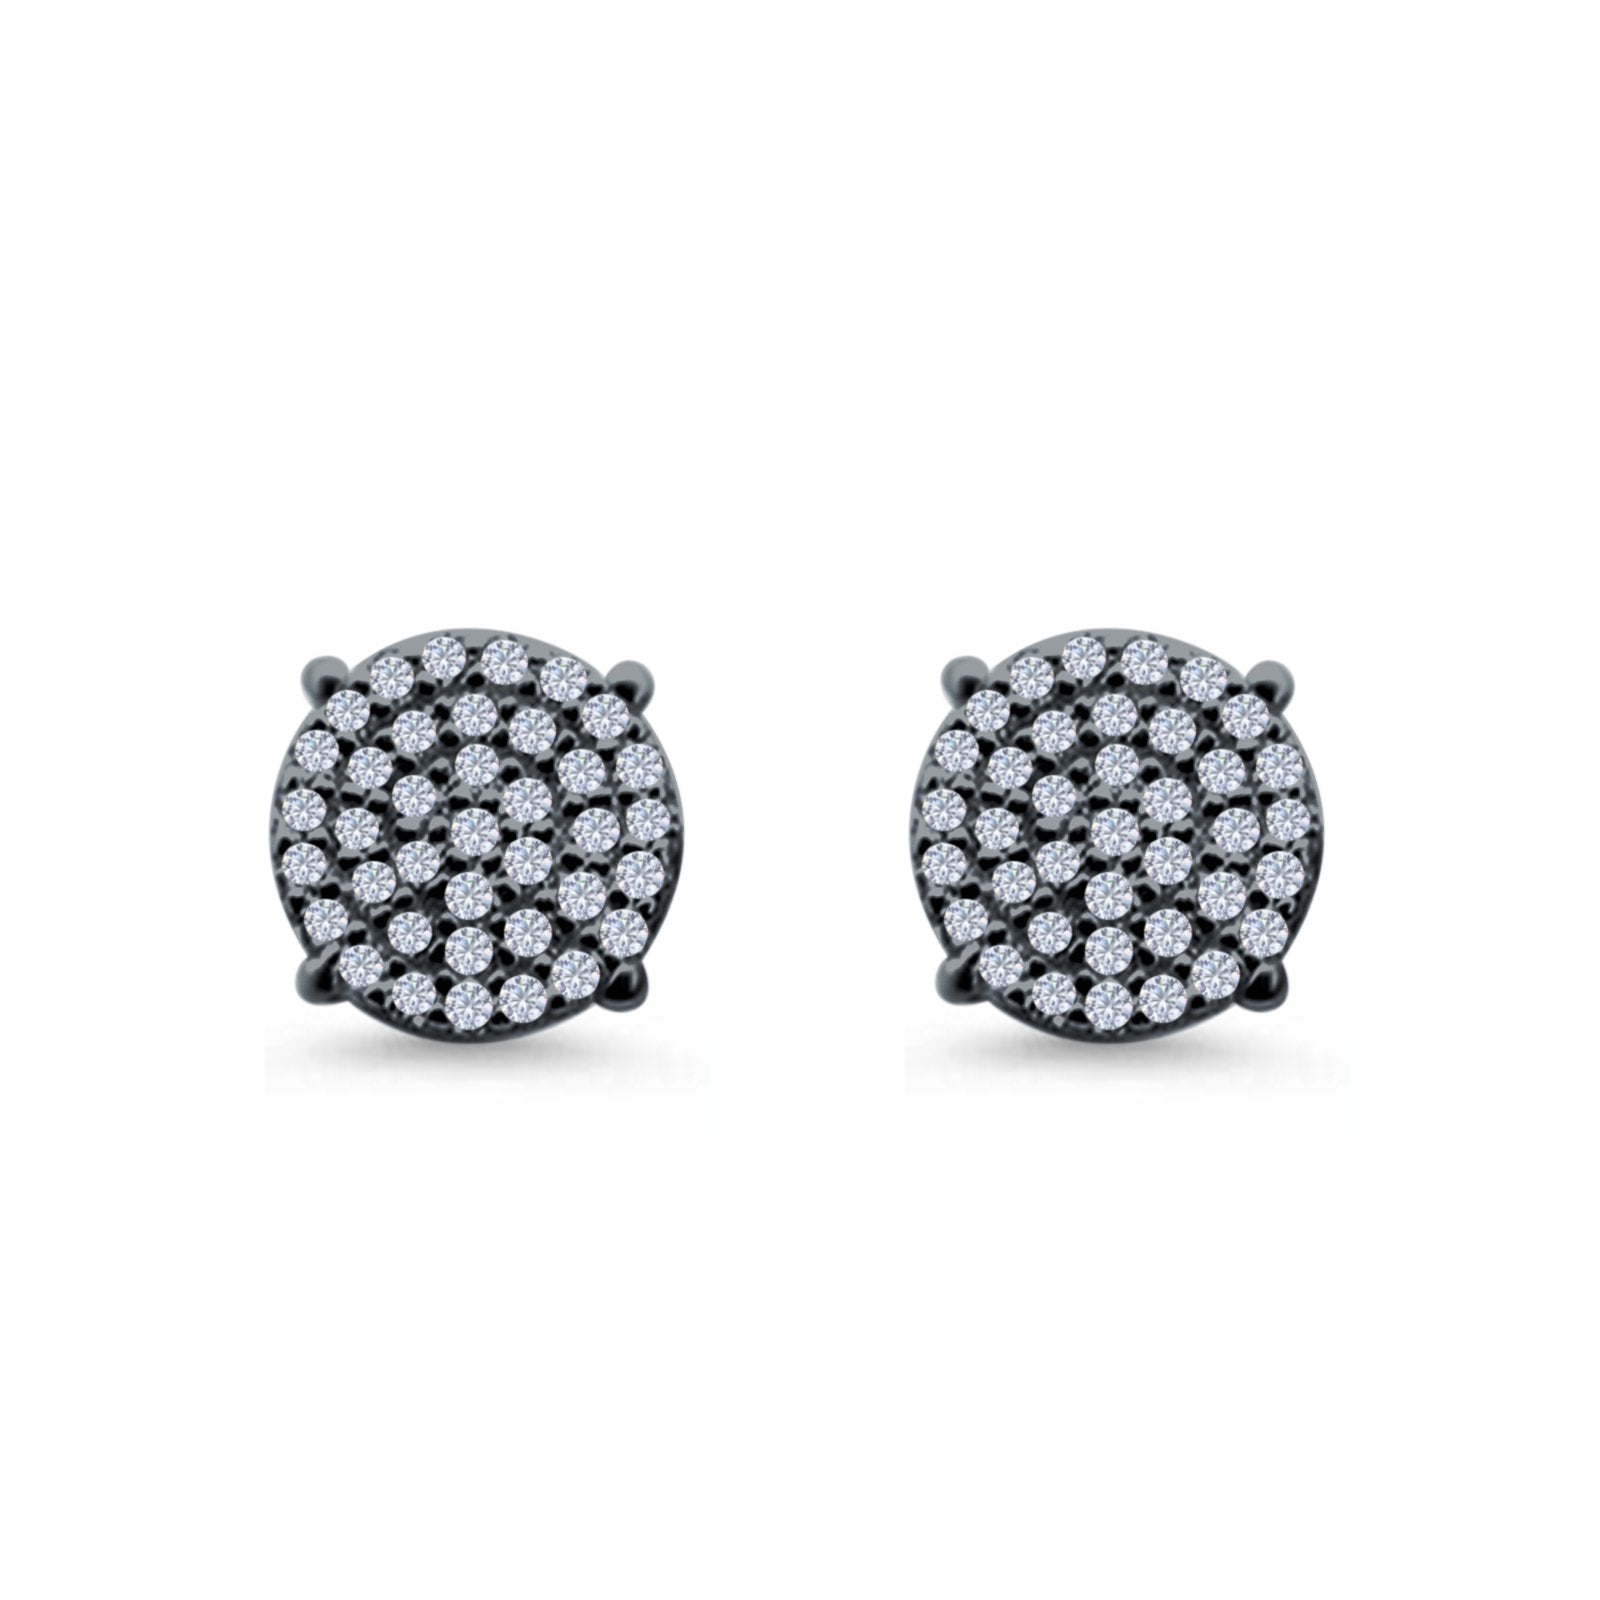 Hip Hop Stud Earrings Screwback Round Simulated CZ 925 Sterling Silver (10mm)